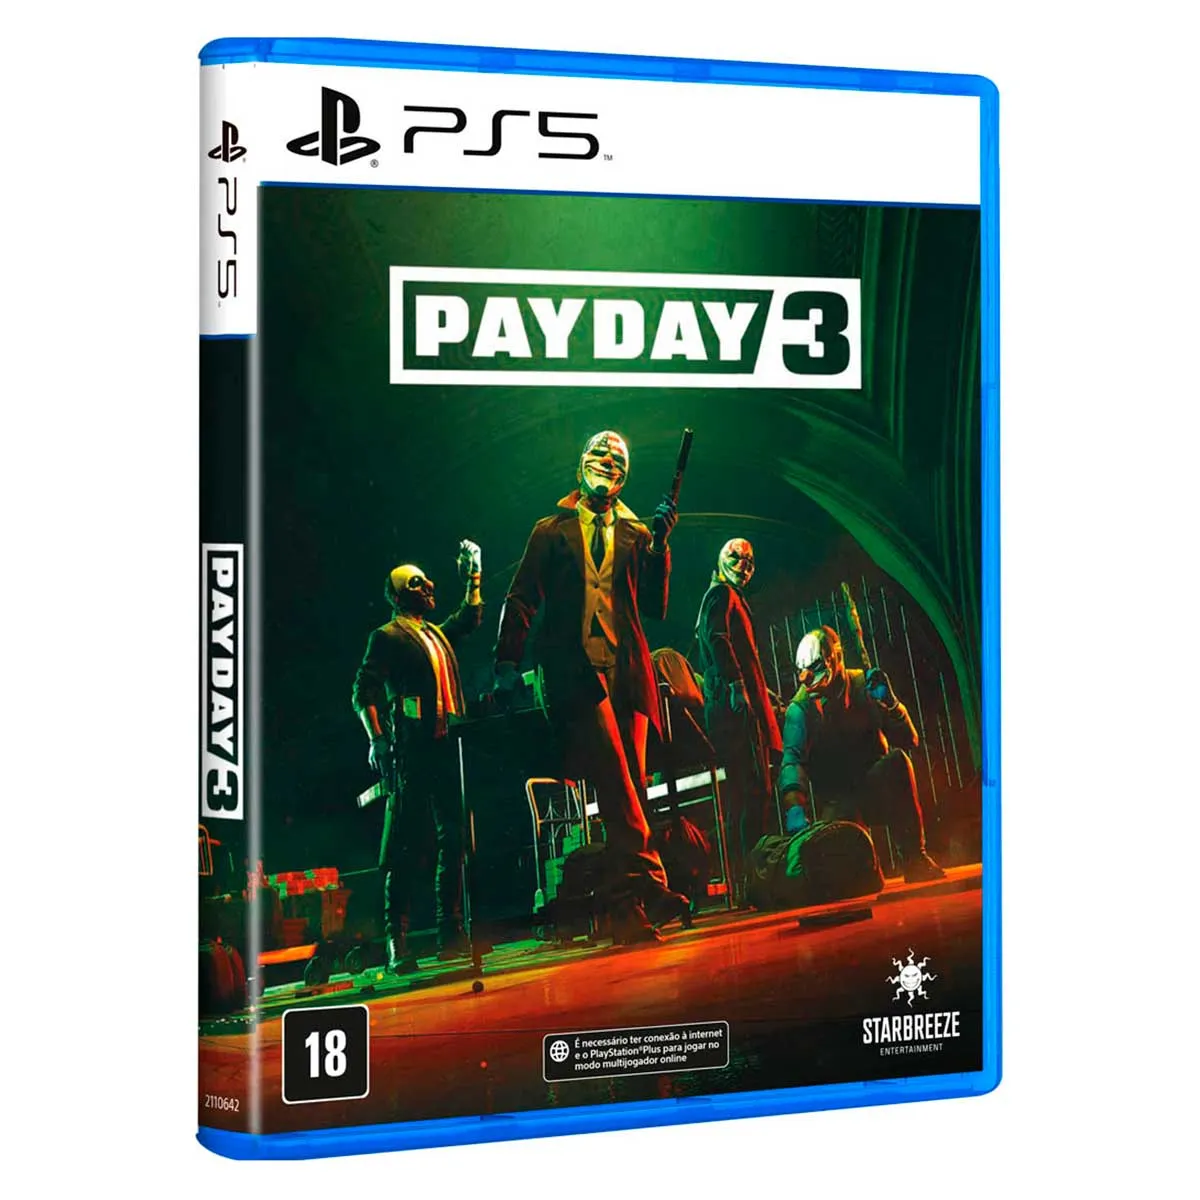 Pay Day 3 Ps5